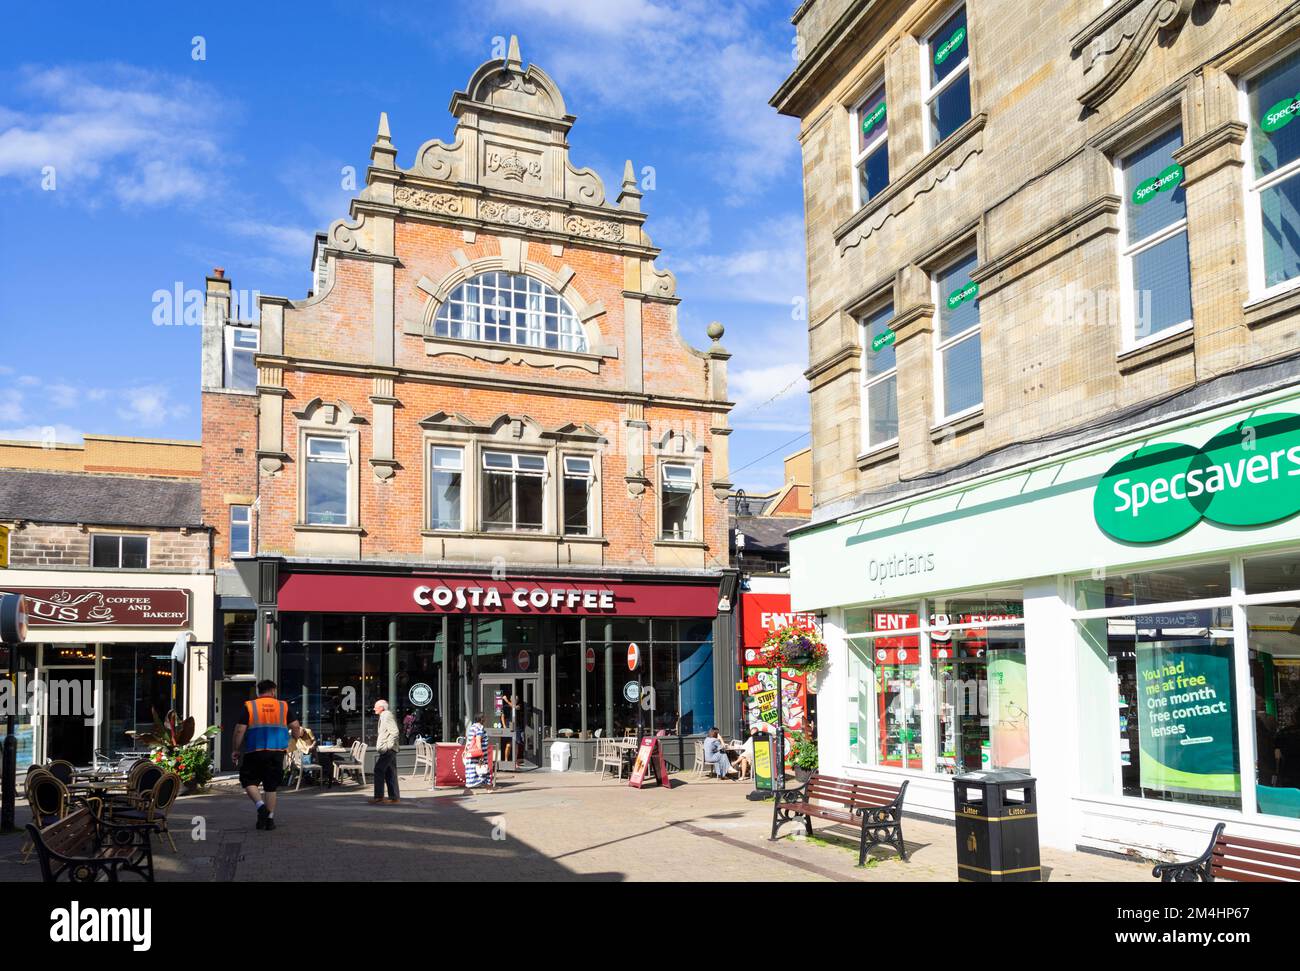 Harrogate Yorkshire Costa Coffee uk shop front facade and Specsavers store in Harrogate town centre Harrogate North Yorkshire England UK GB Europe Stock Photo